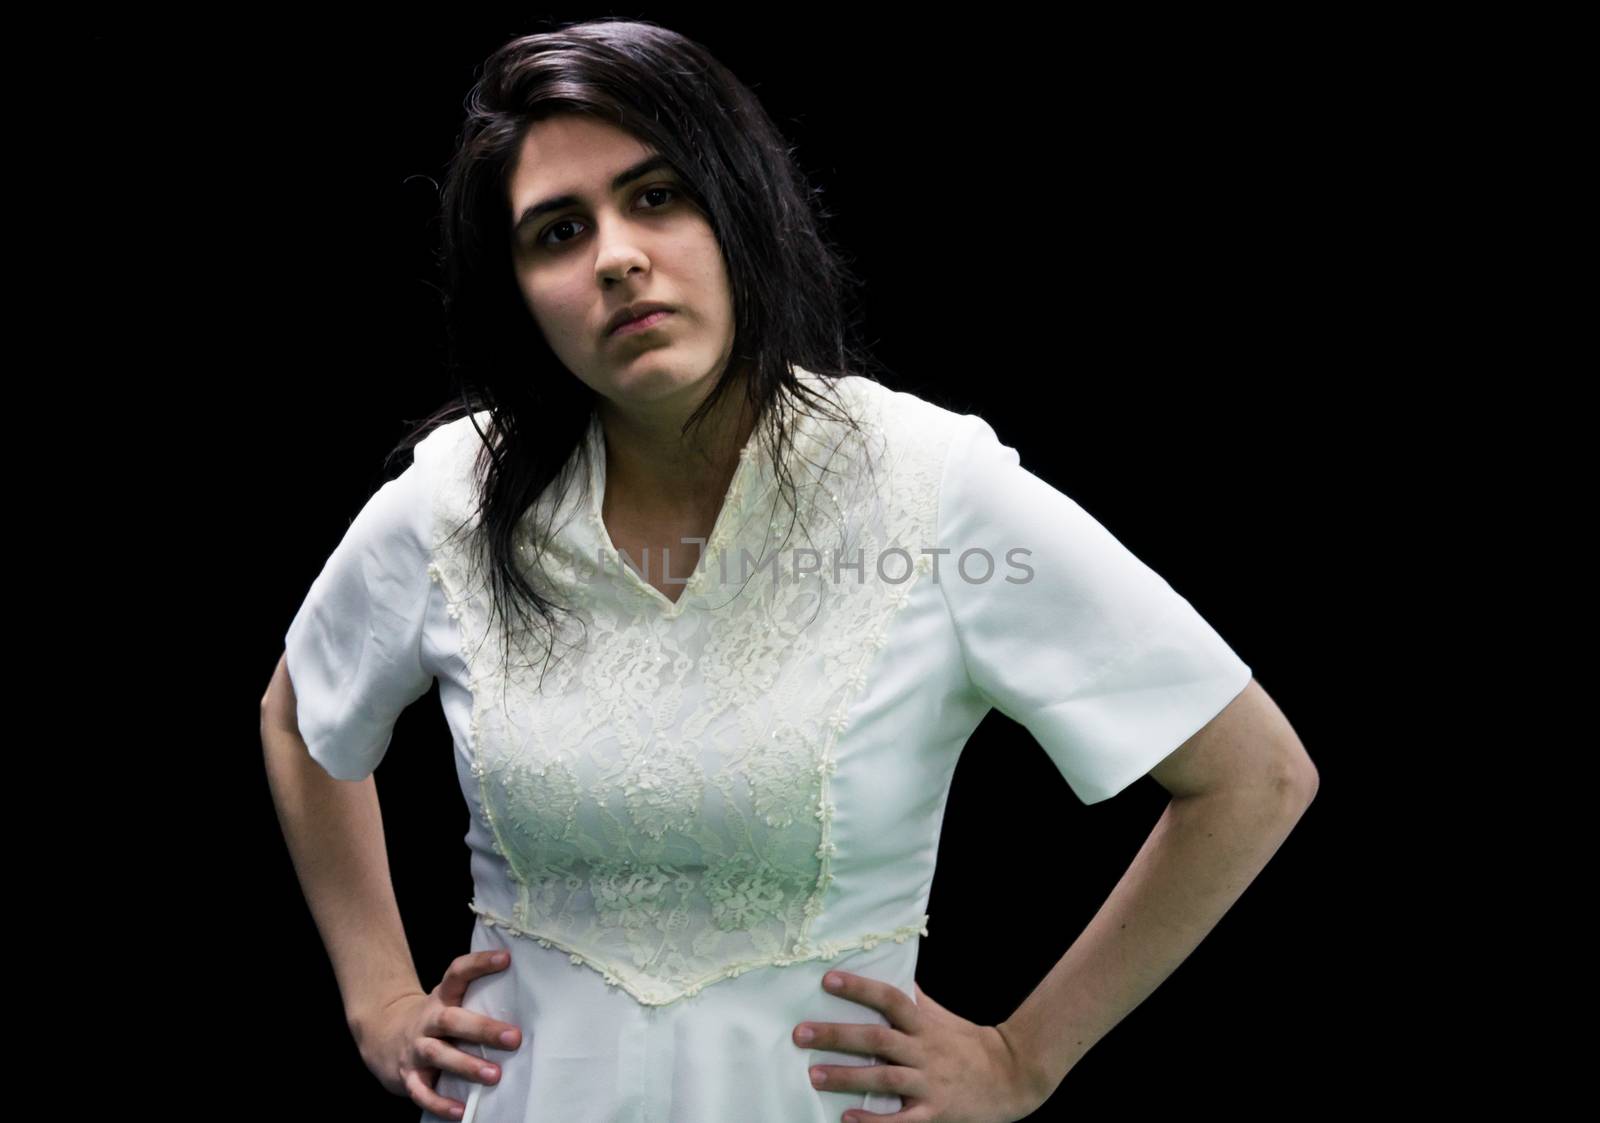 Latina teenager in white standing in front of a black background with hands on hips and a serious look on her face